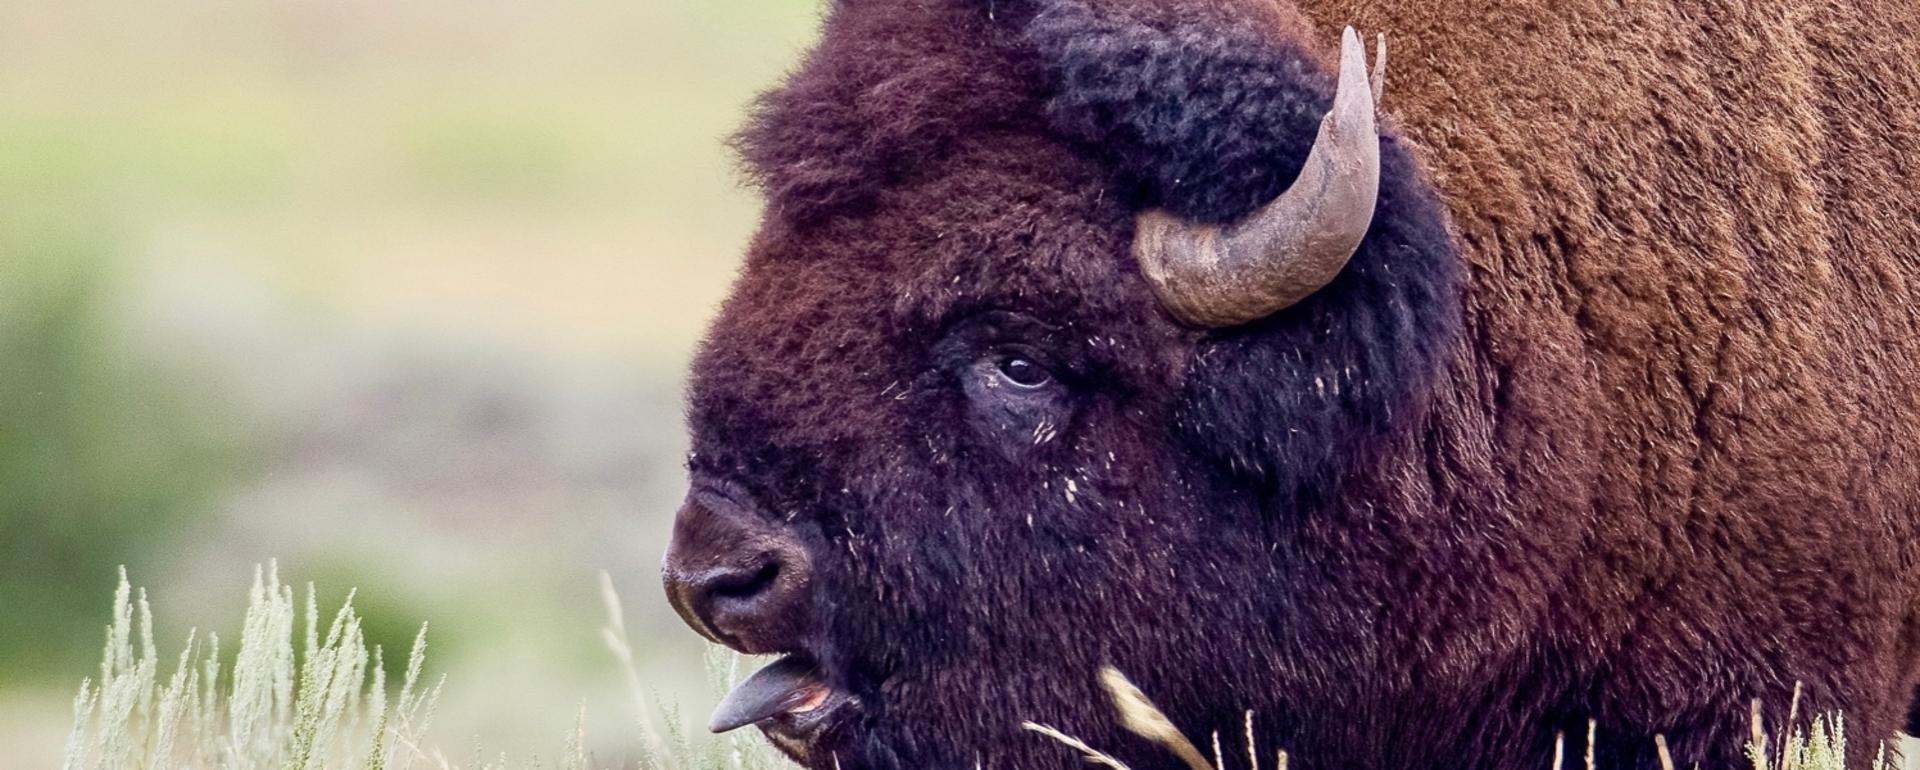 A bison in Yellowstone